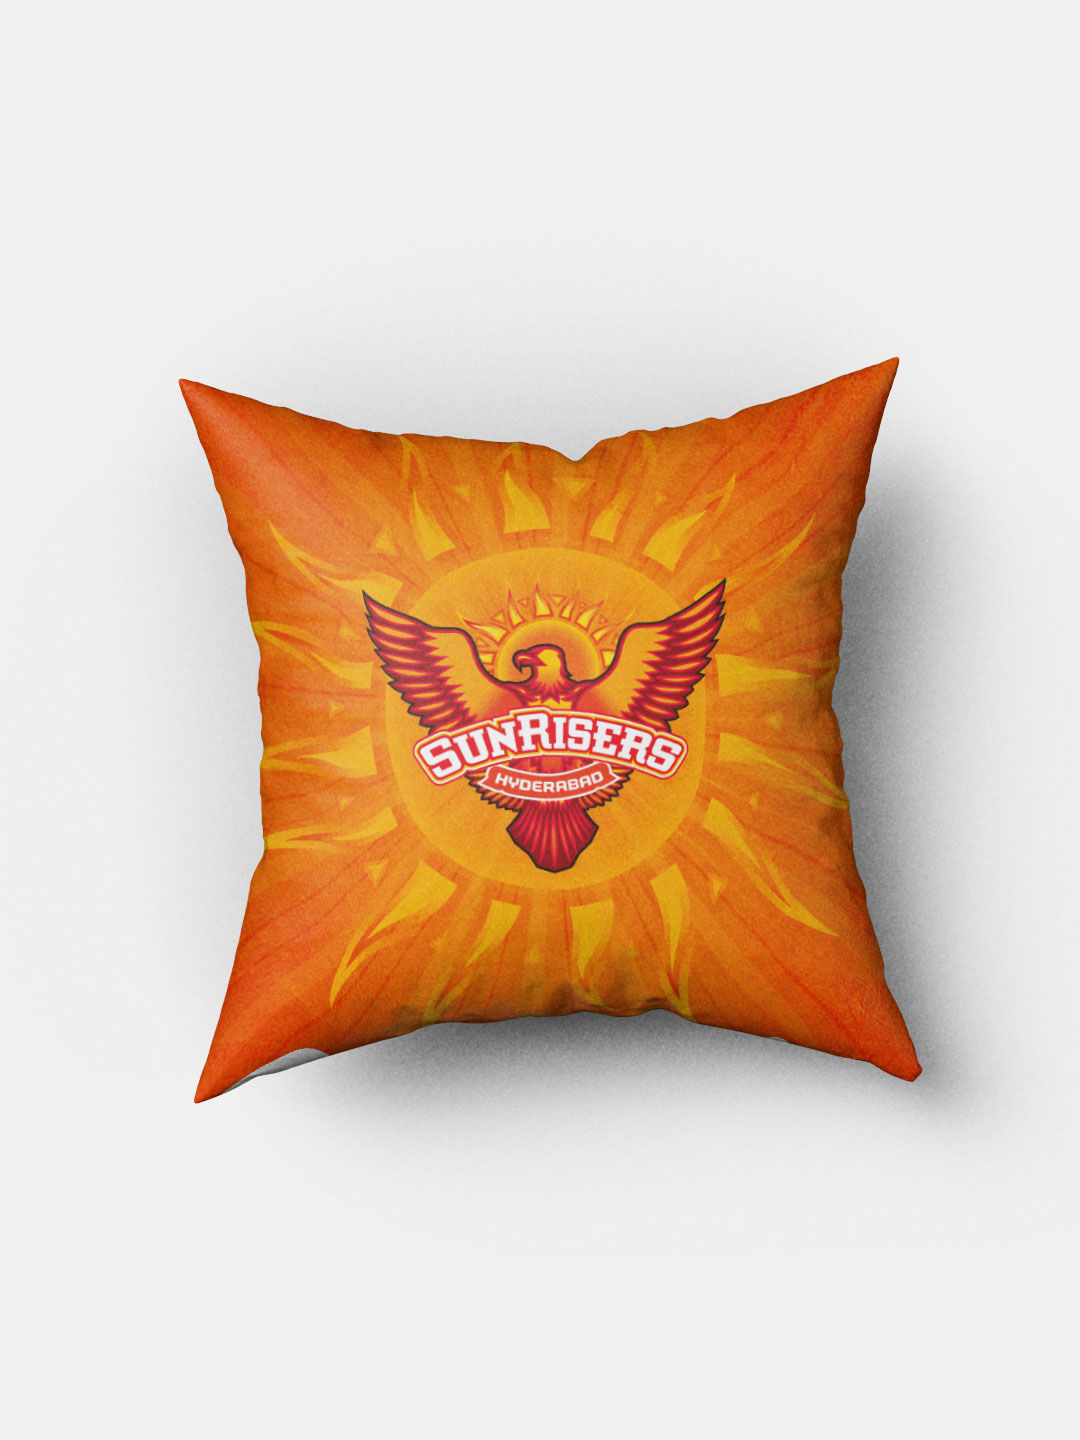 Buy Sunrisers Hyderabad - Square Pillows Pillow Online